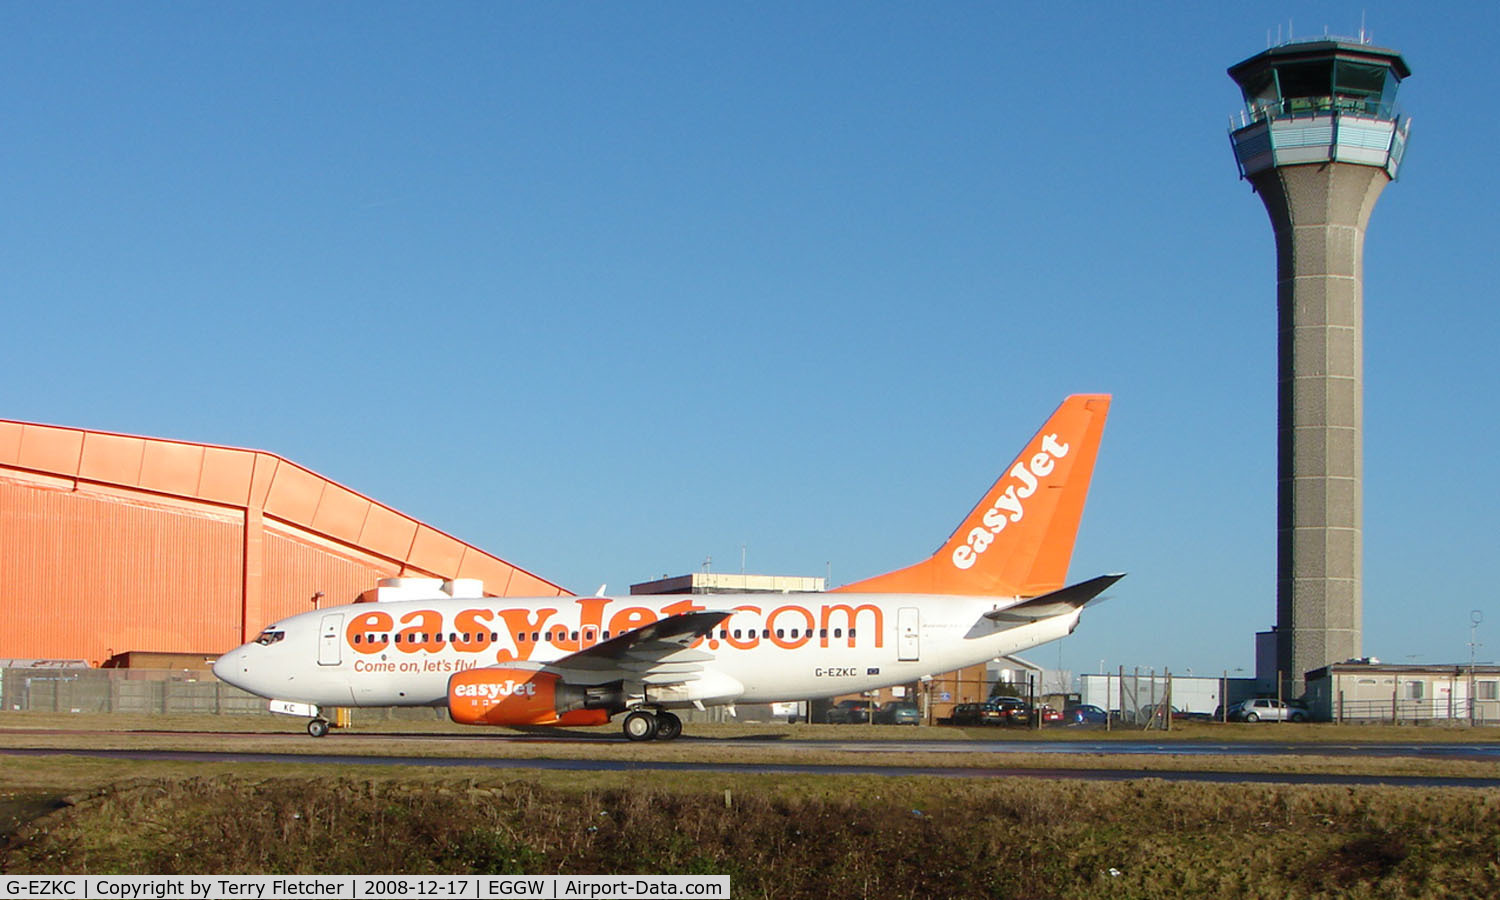 G-EZKC, 2004 Boeing 737-73V C/N 32424, Easyjet B737 taxies in on a cold clear Luton day